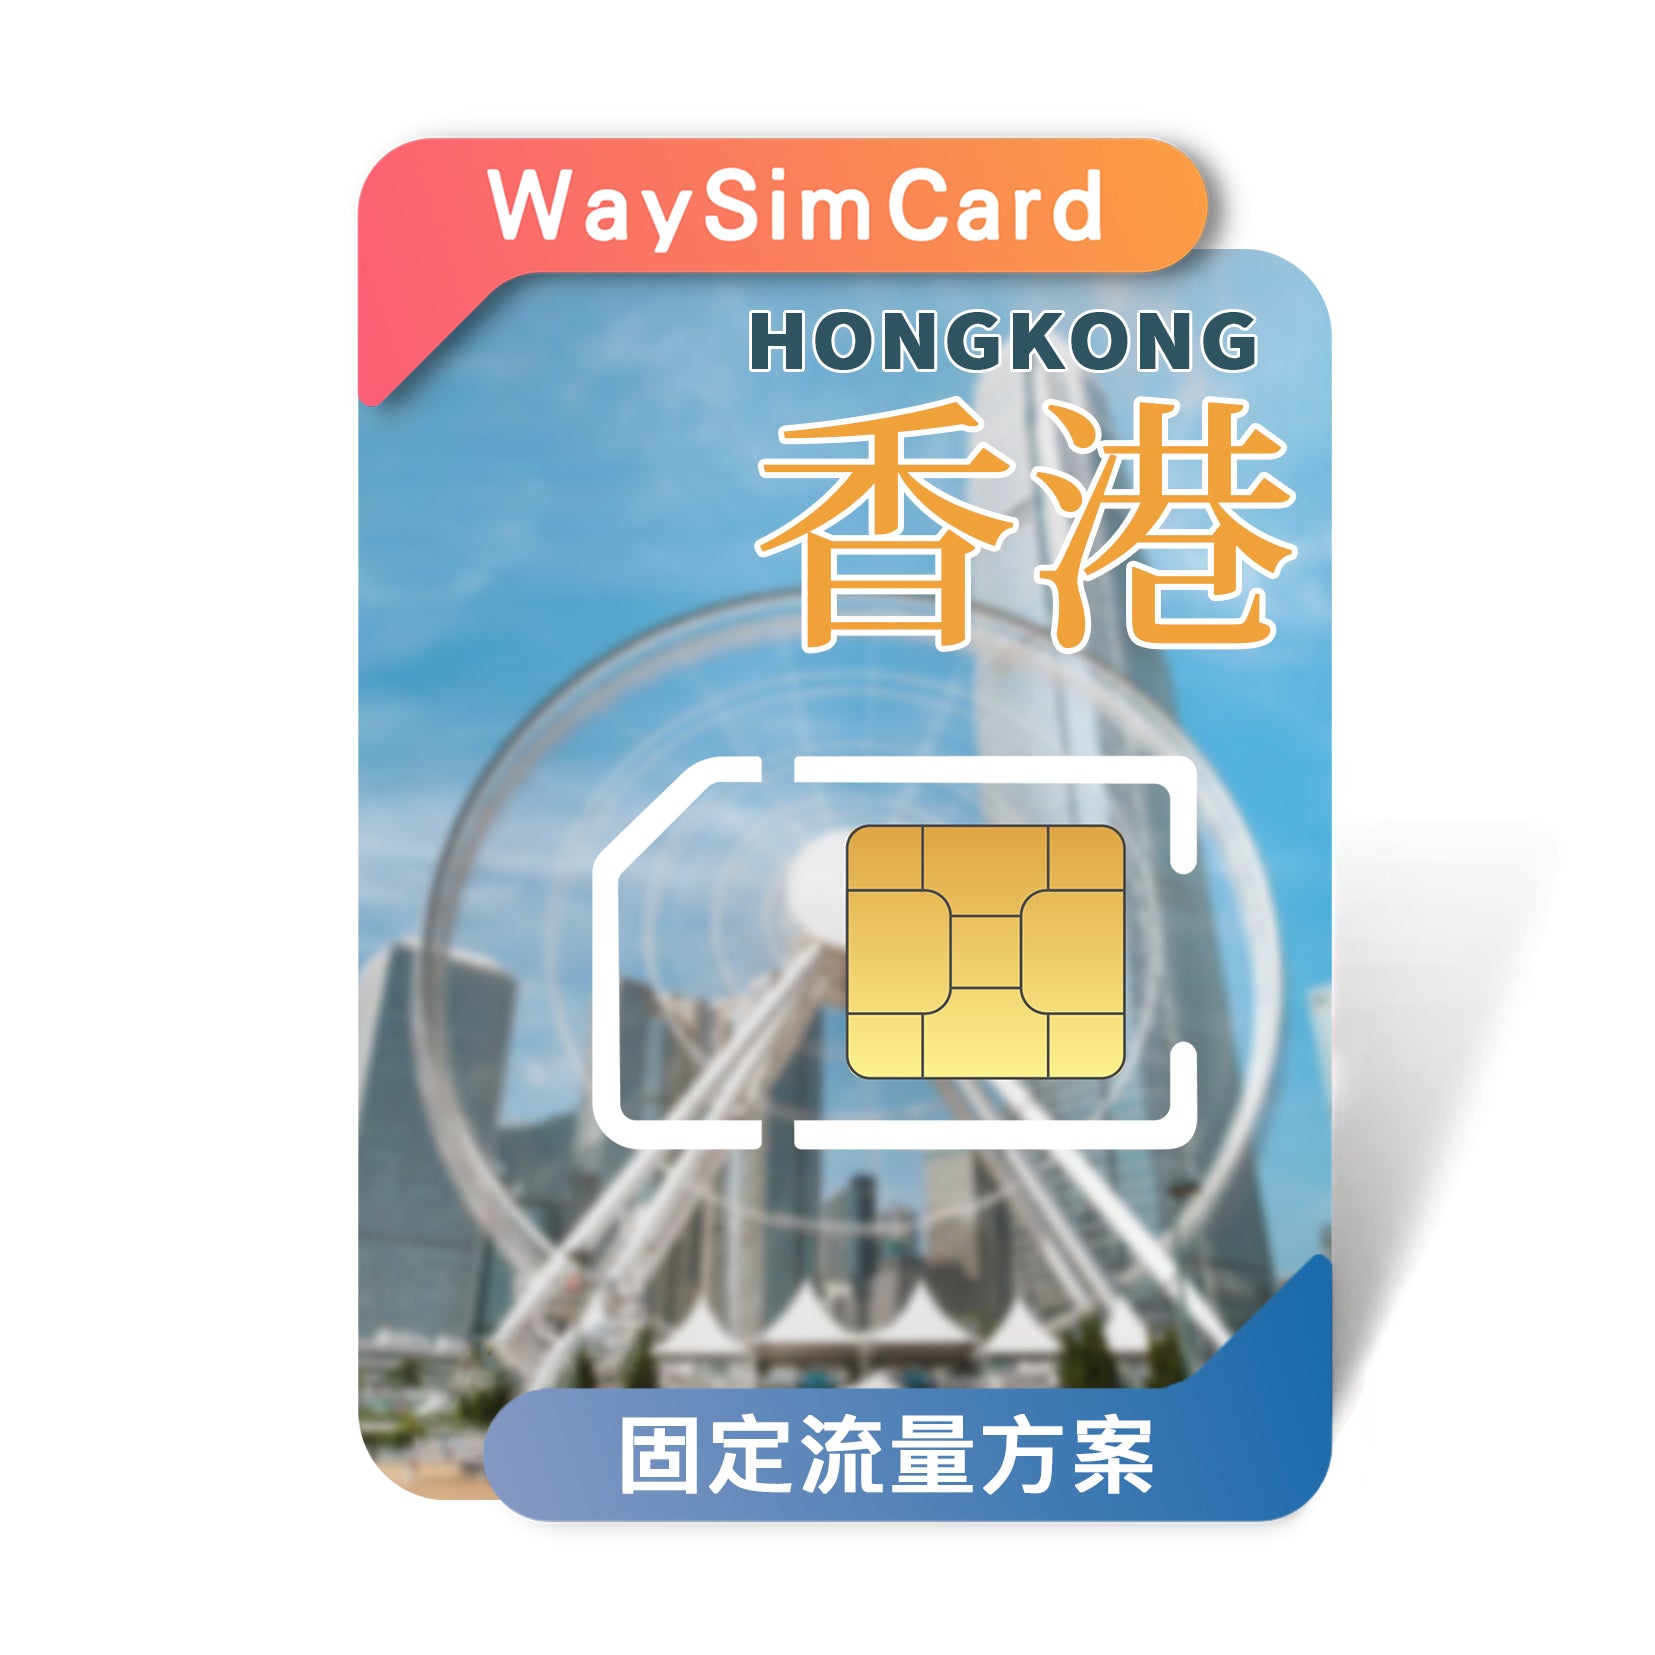 Internet card for China, Hong Kong and Macau│4G high-speed fixed traffic│8, 15, 30, 90 days